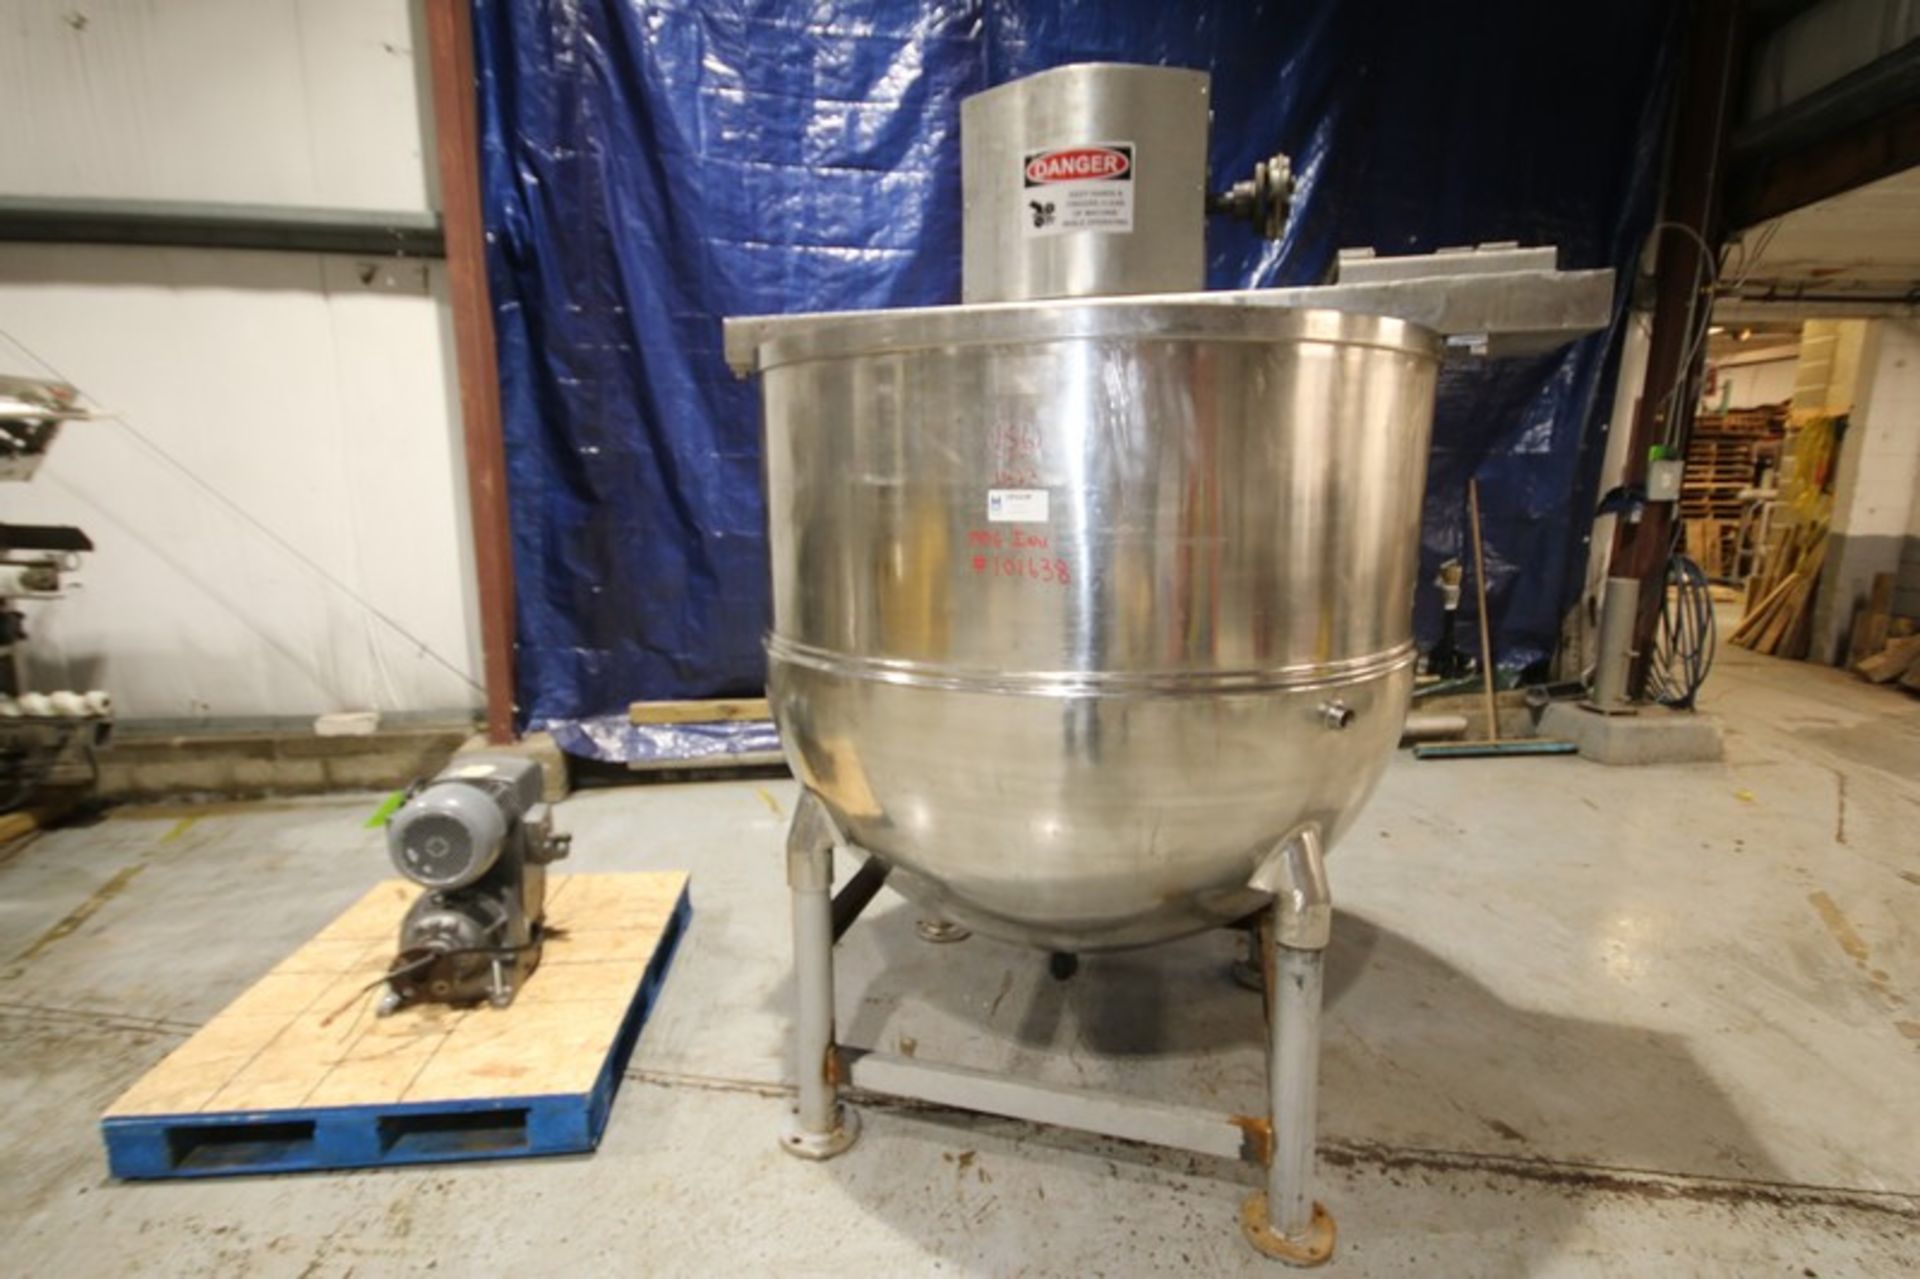 Groen 500 Gallon Jacketed S/S Kettle, Model 500, SN & BN 23122, with Bottom & Side Scrape Surface